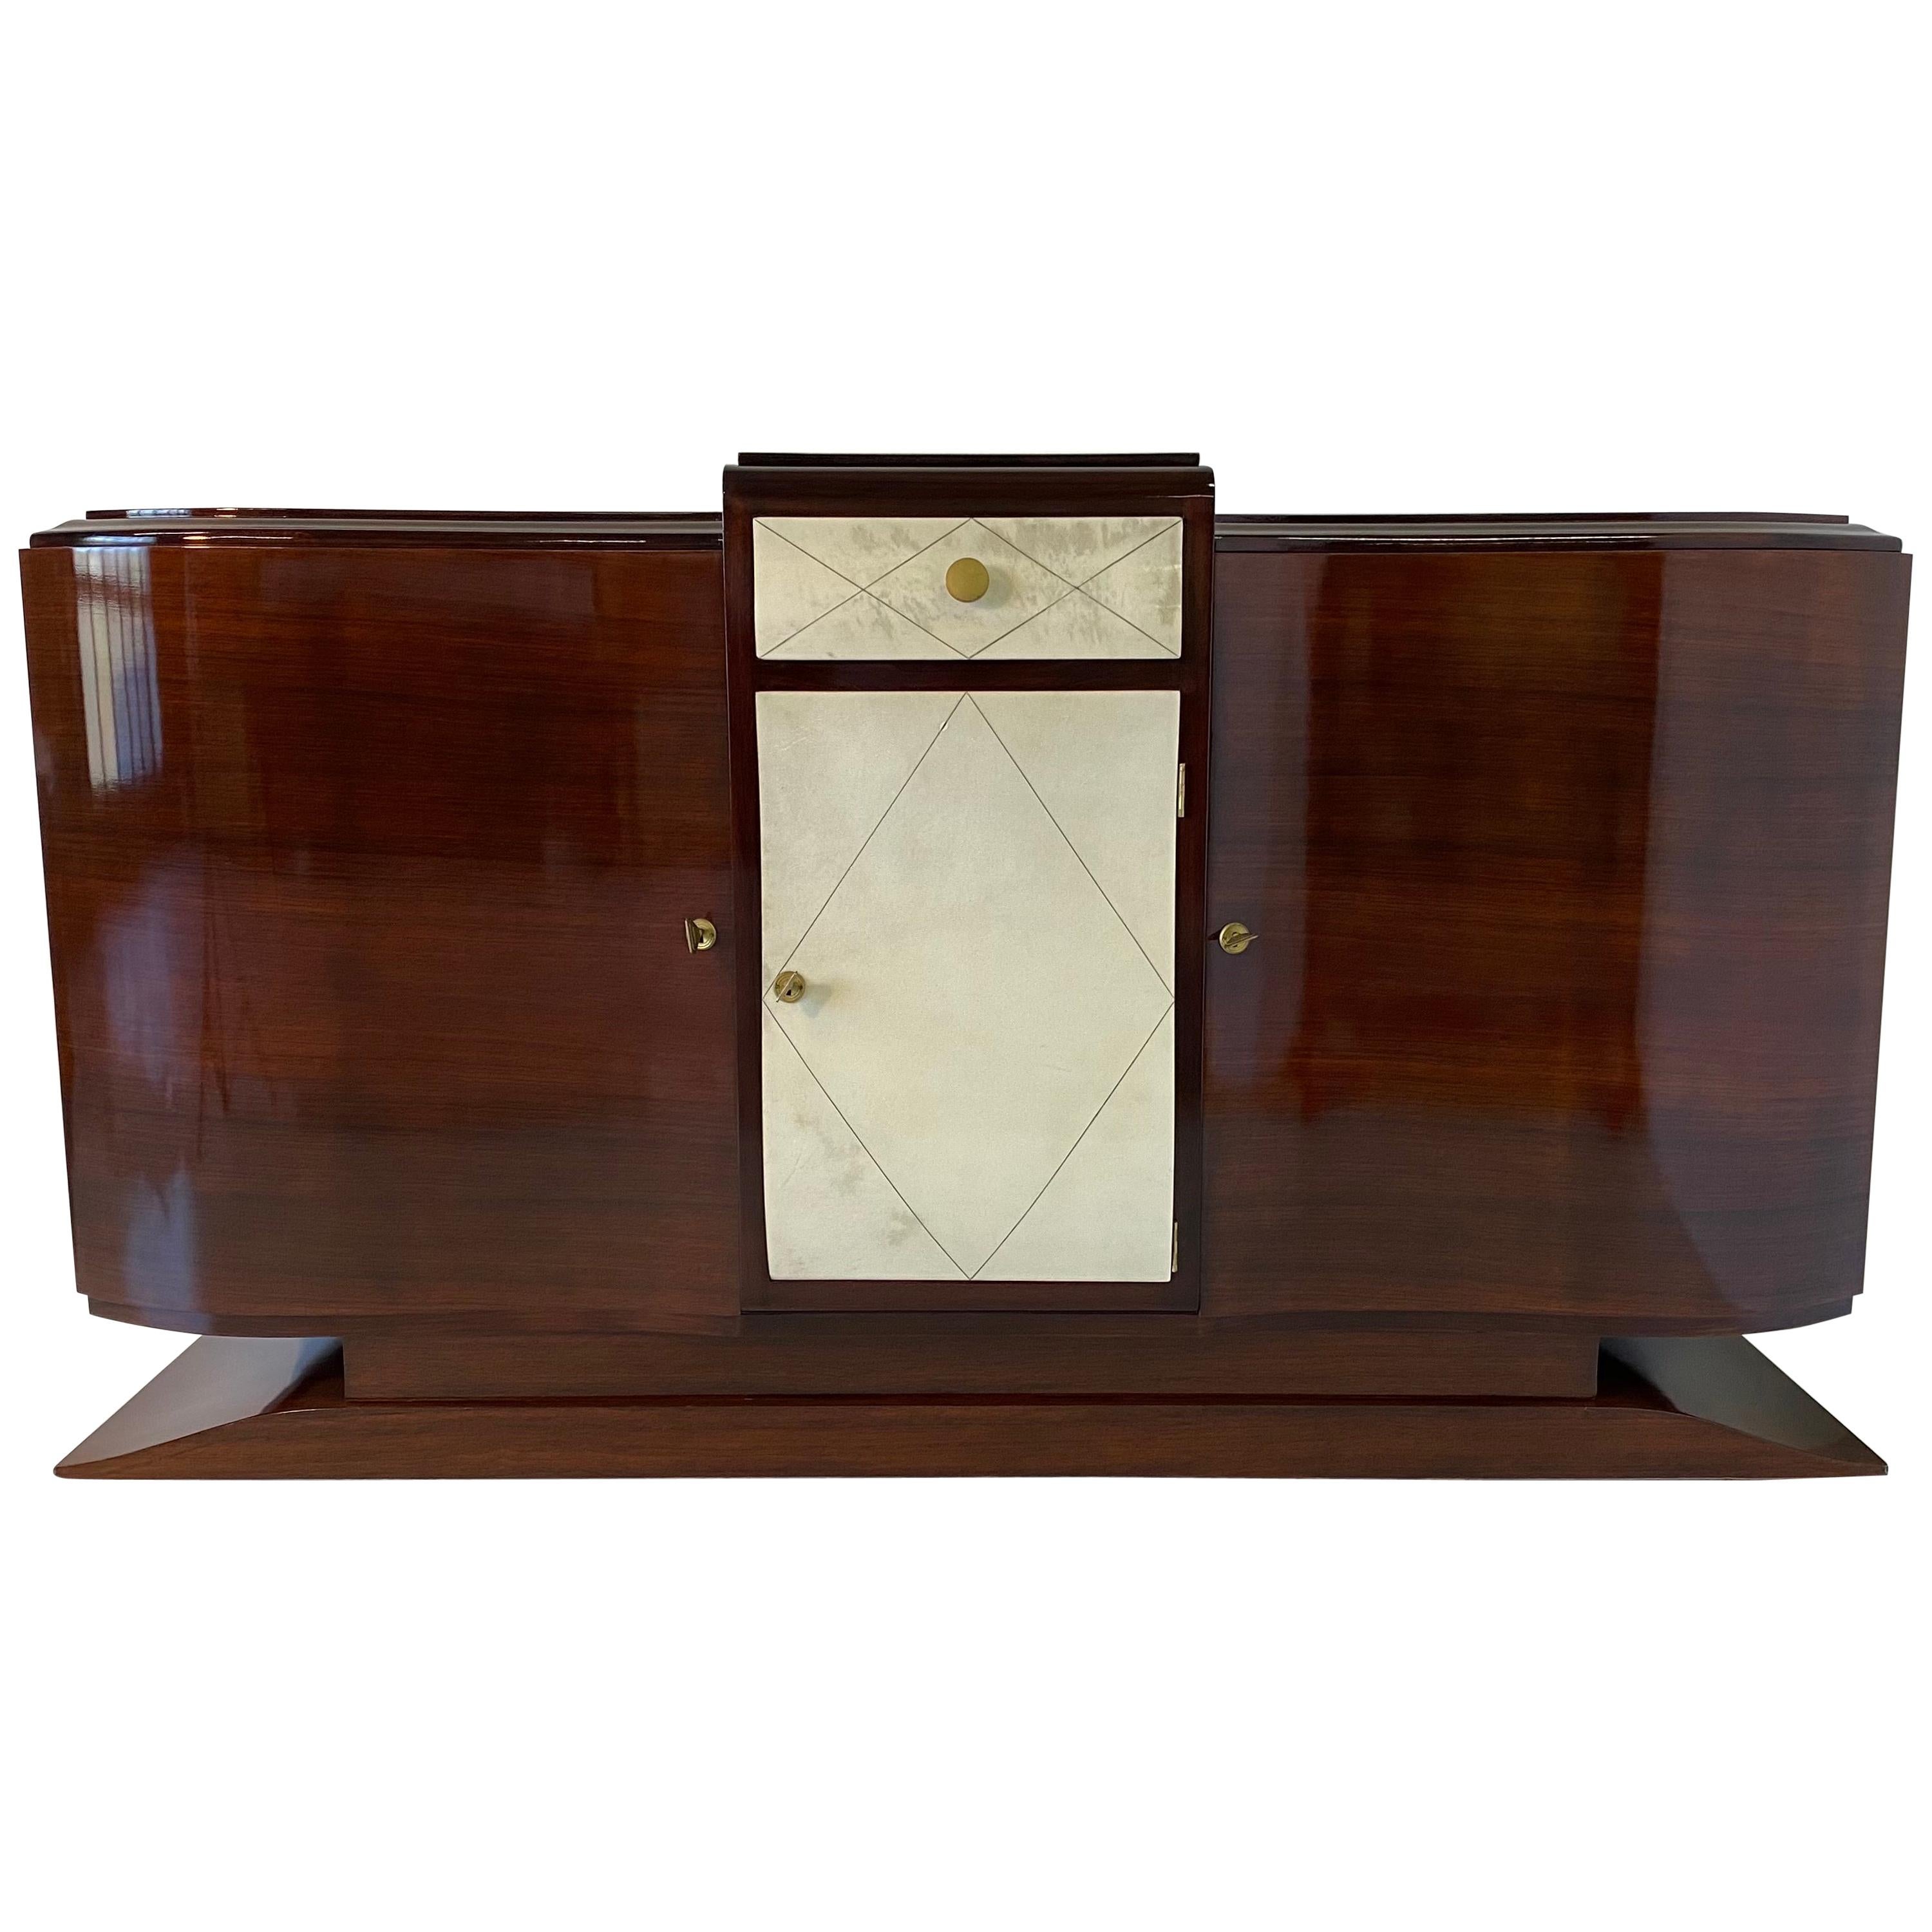 French Art Deco Parchment Sideboard, 1930s